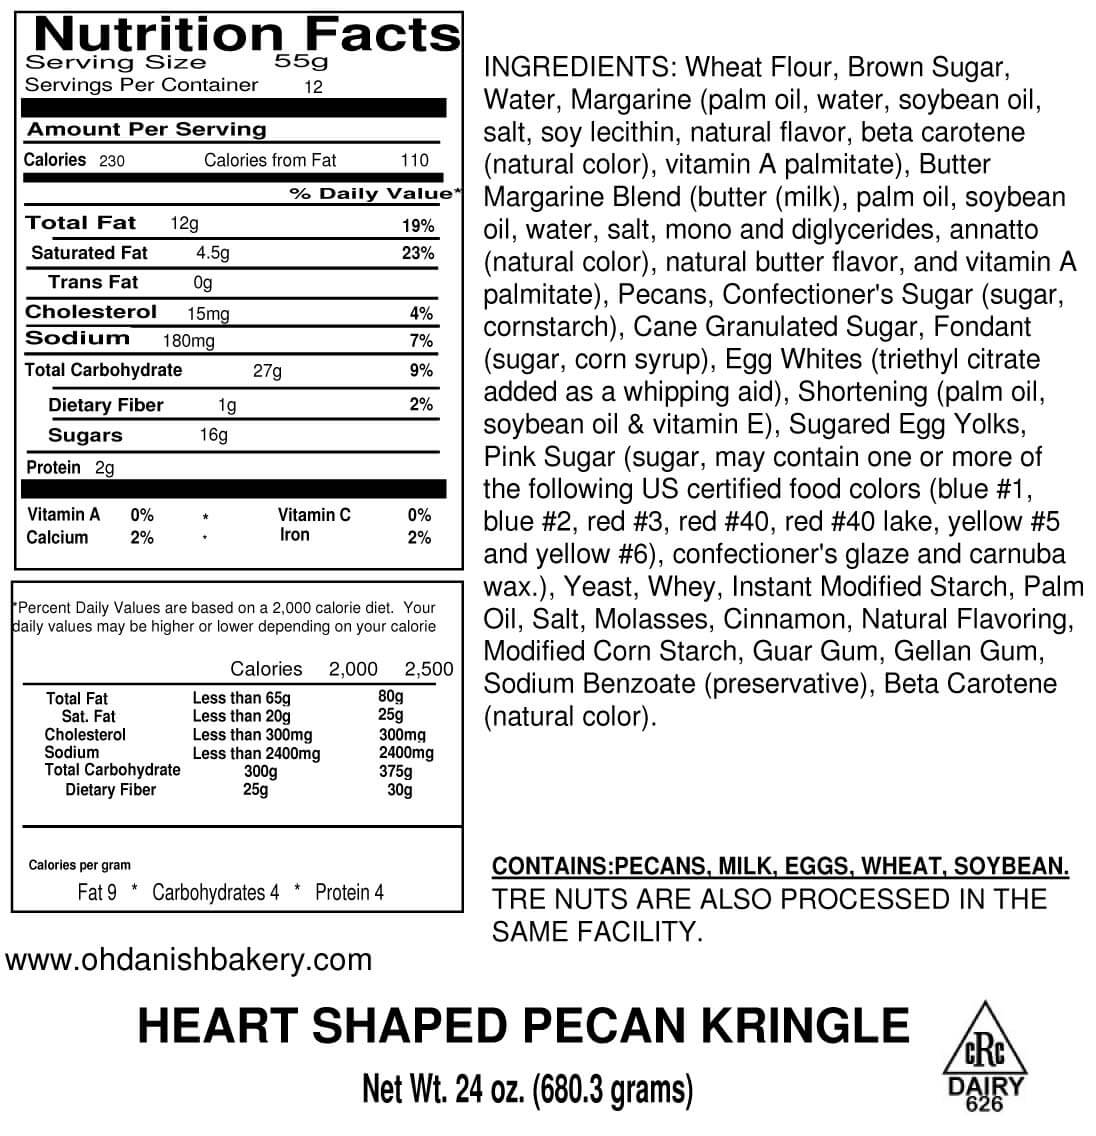 Nutritional Label for Mother's Day Pecan Heart Shaped Kringle